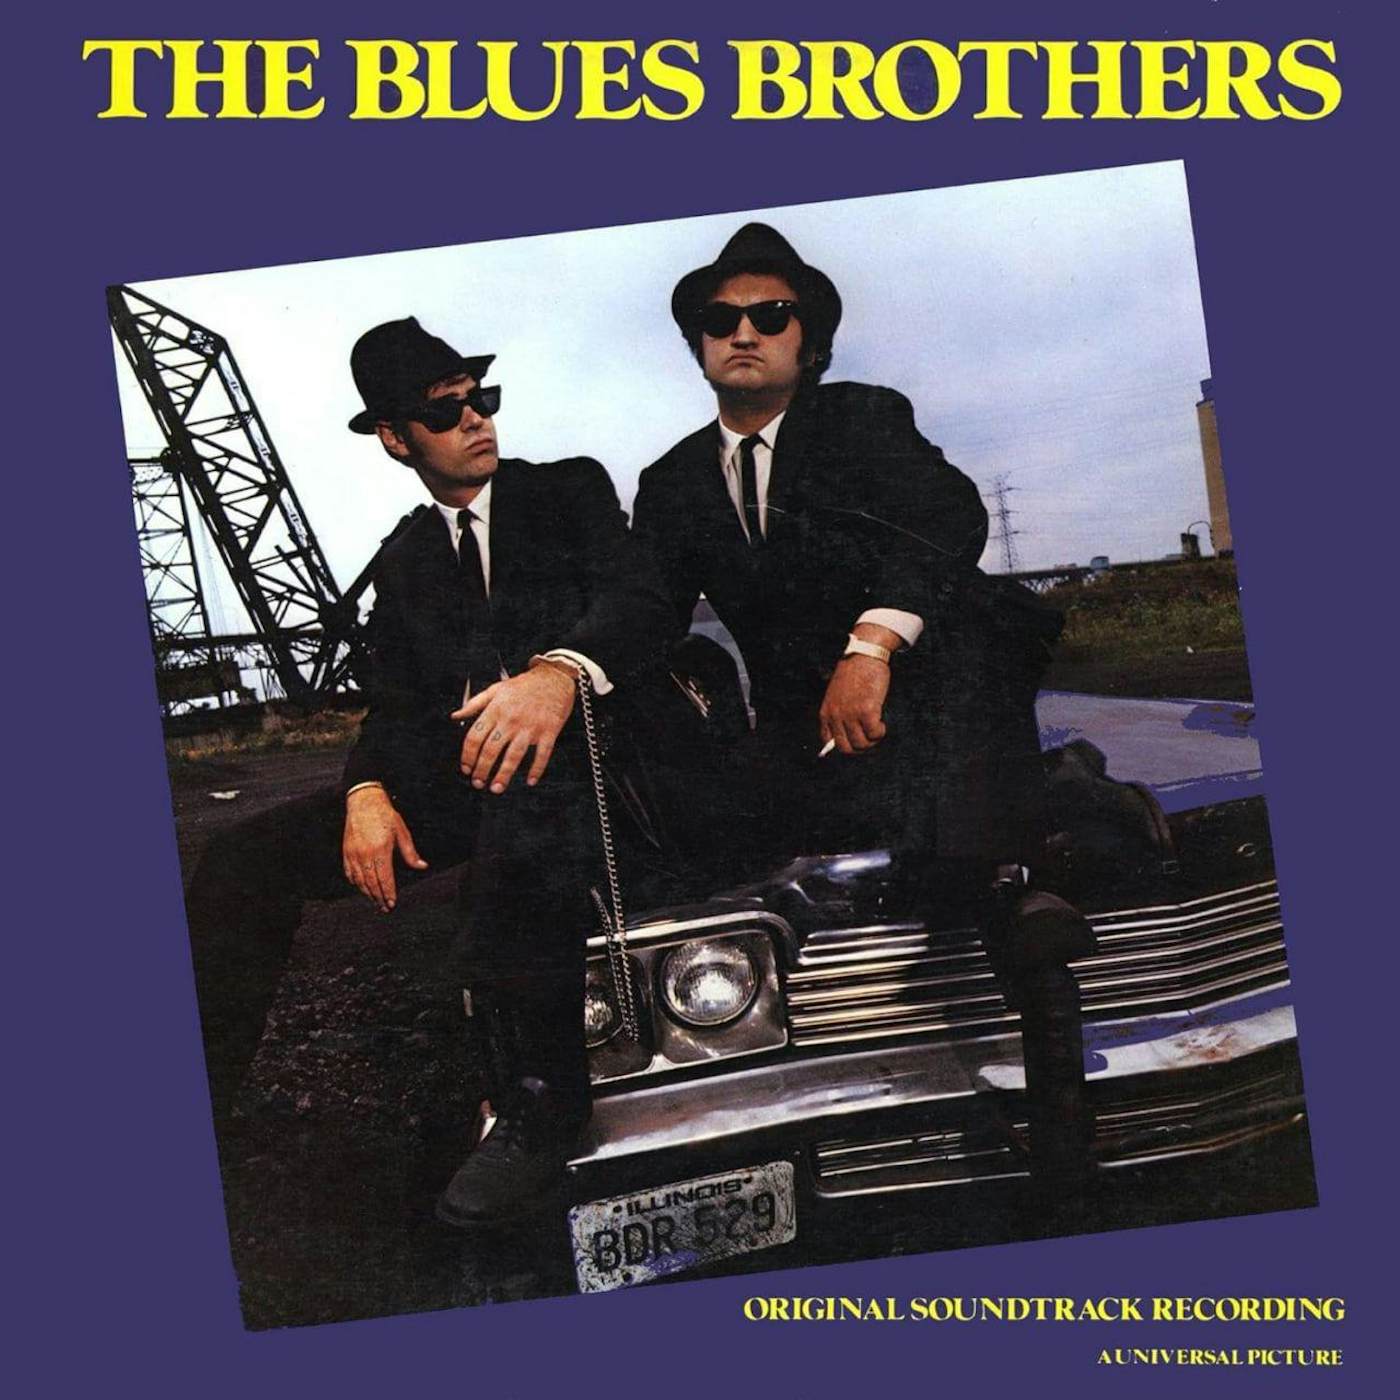 The Blues & Brothers  The Blue Brothers - Original Soundtrack Recording (Limited Edition/Translucent Blue) Vinyl Record